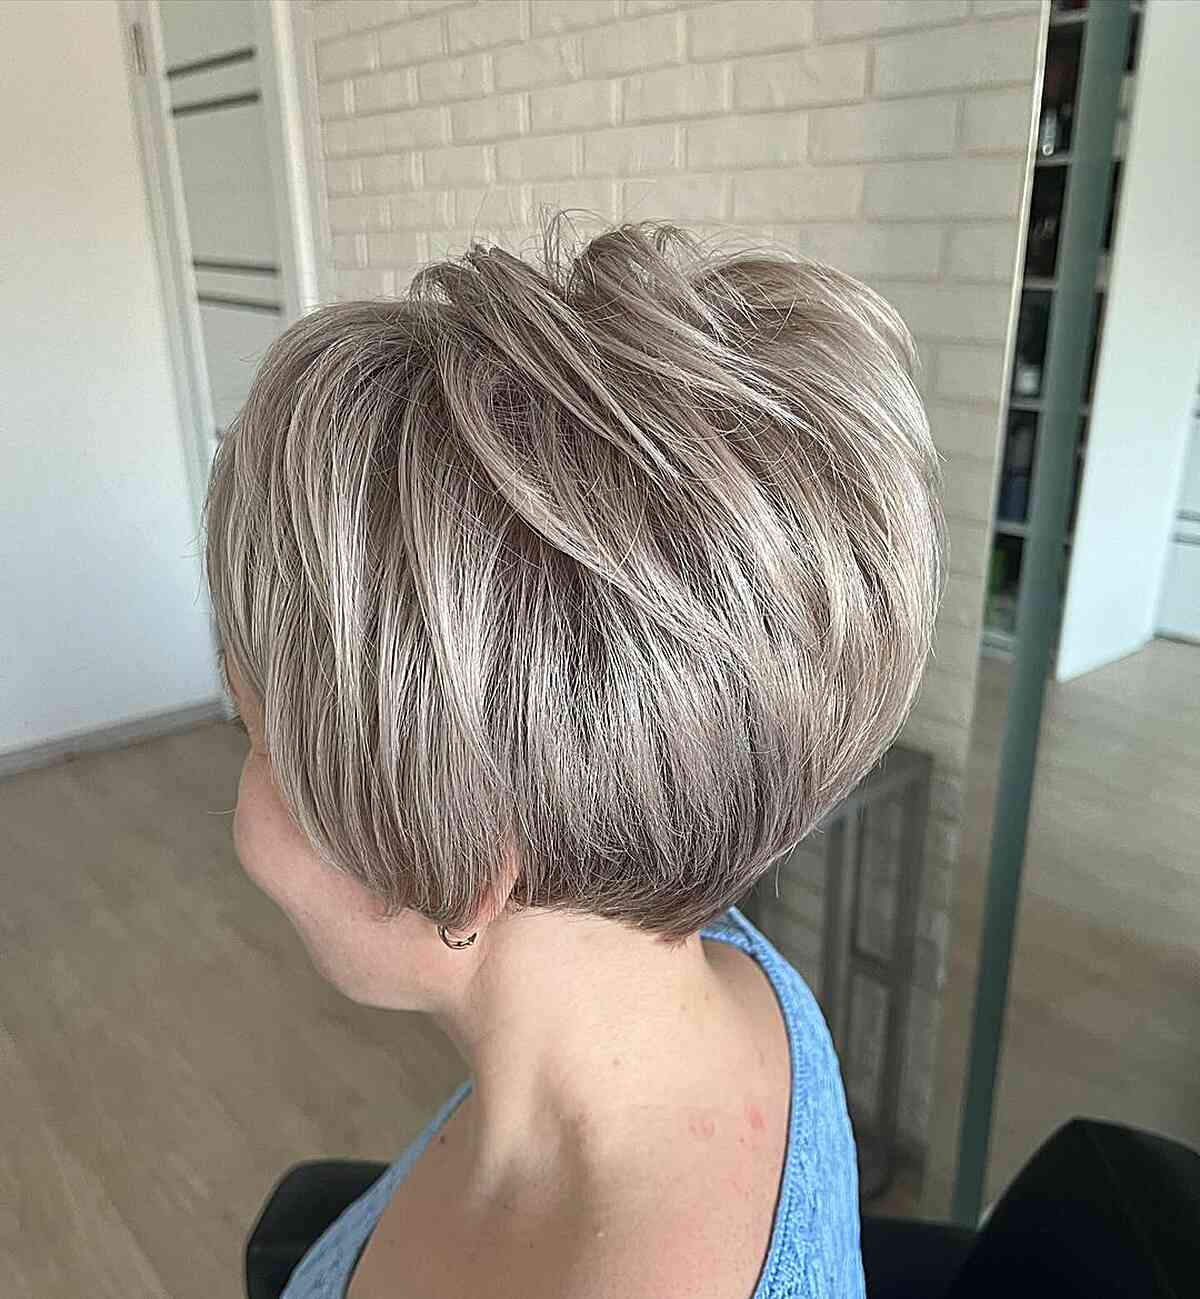 Thick Cropped Pixie Hair with Piece-y Layers